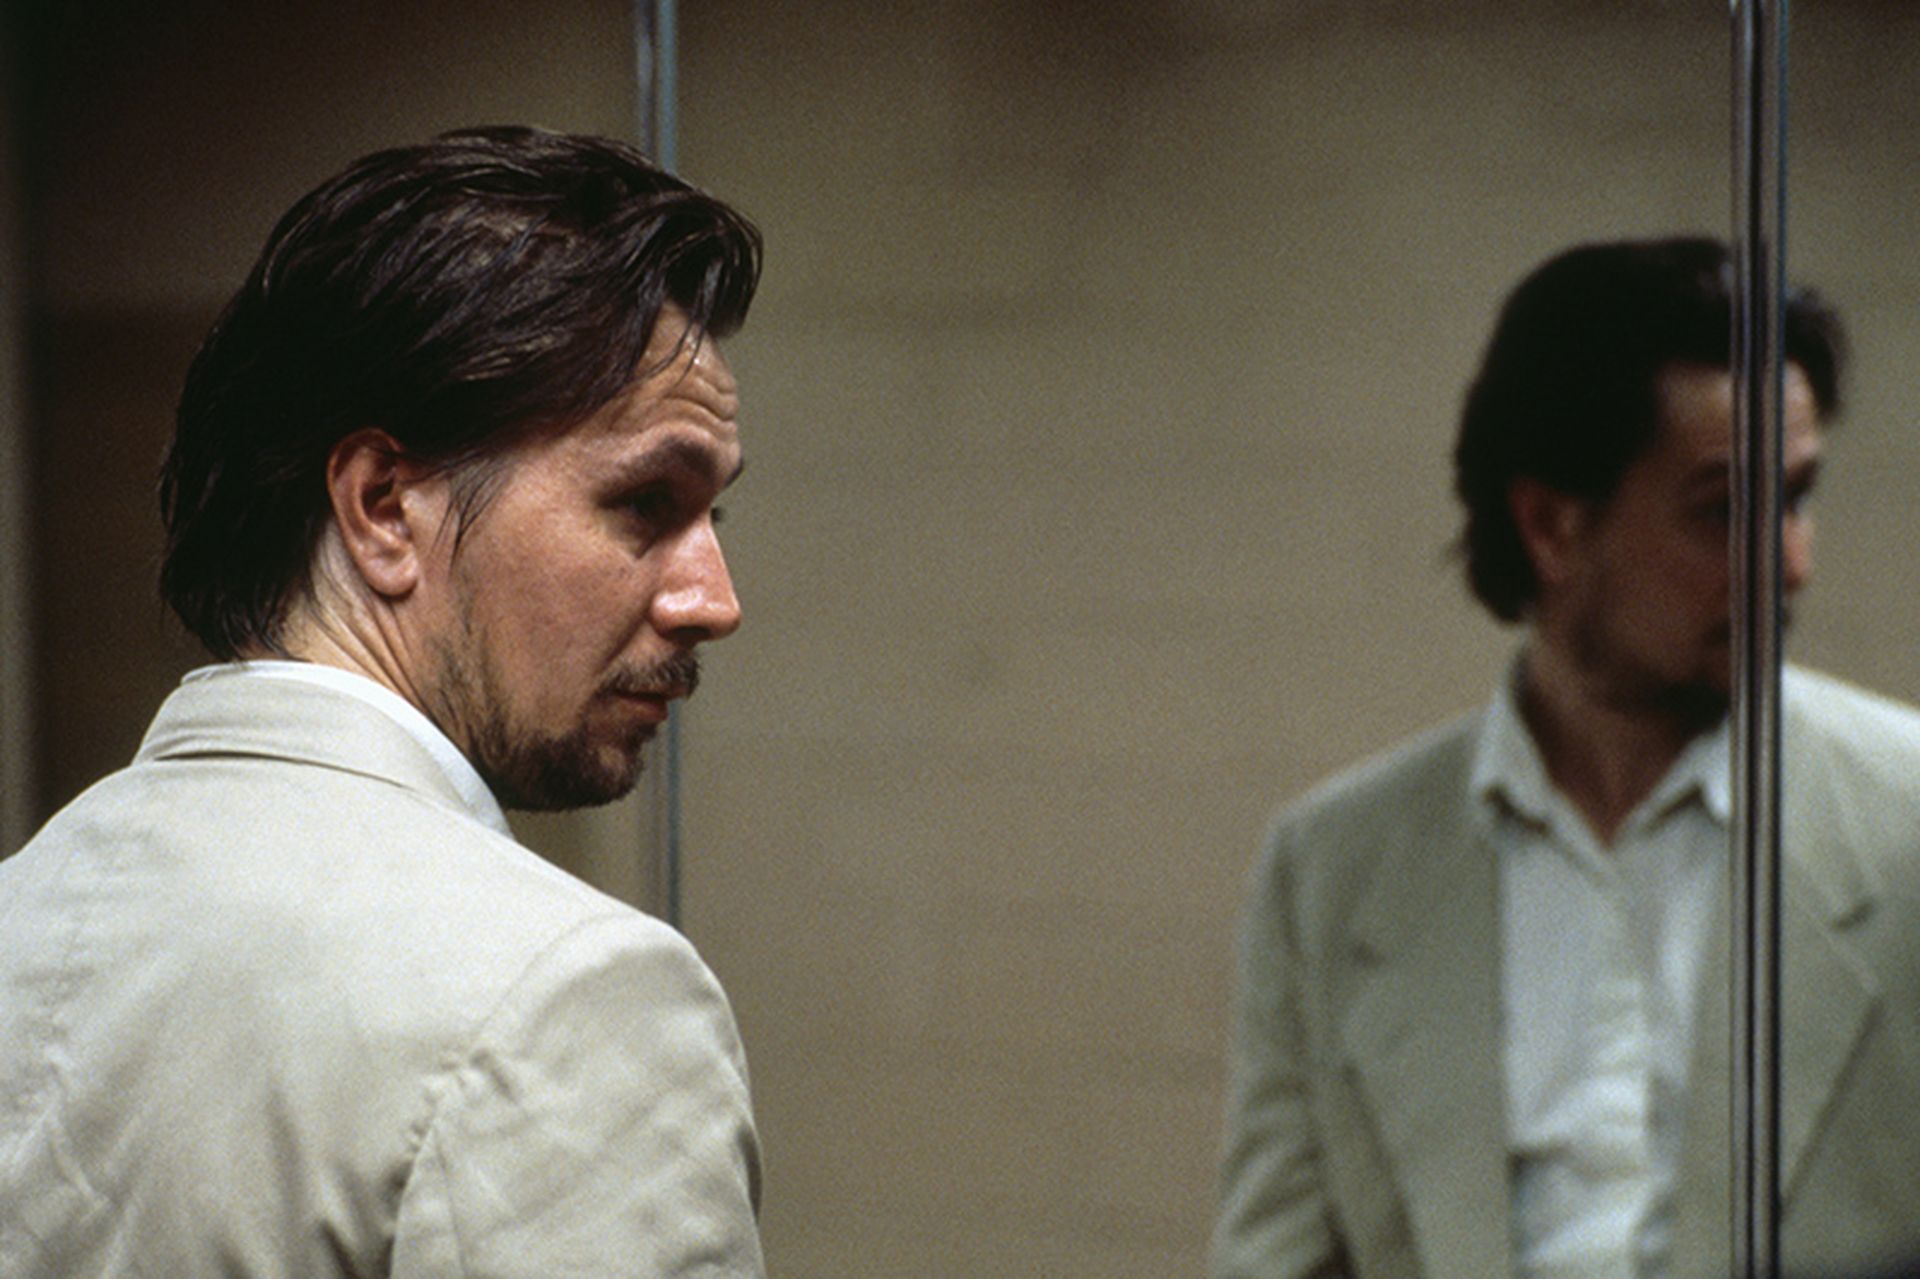 Actor Gary Oldman in a scene from the movie "Leon."